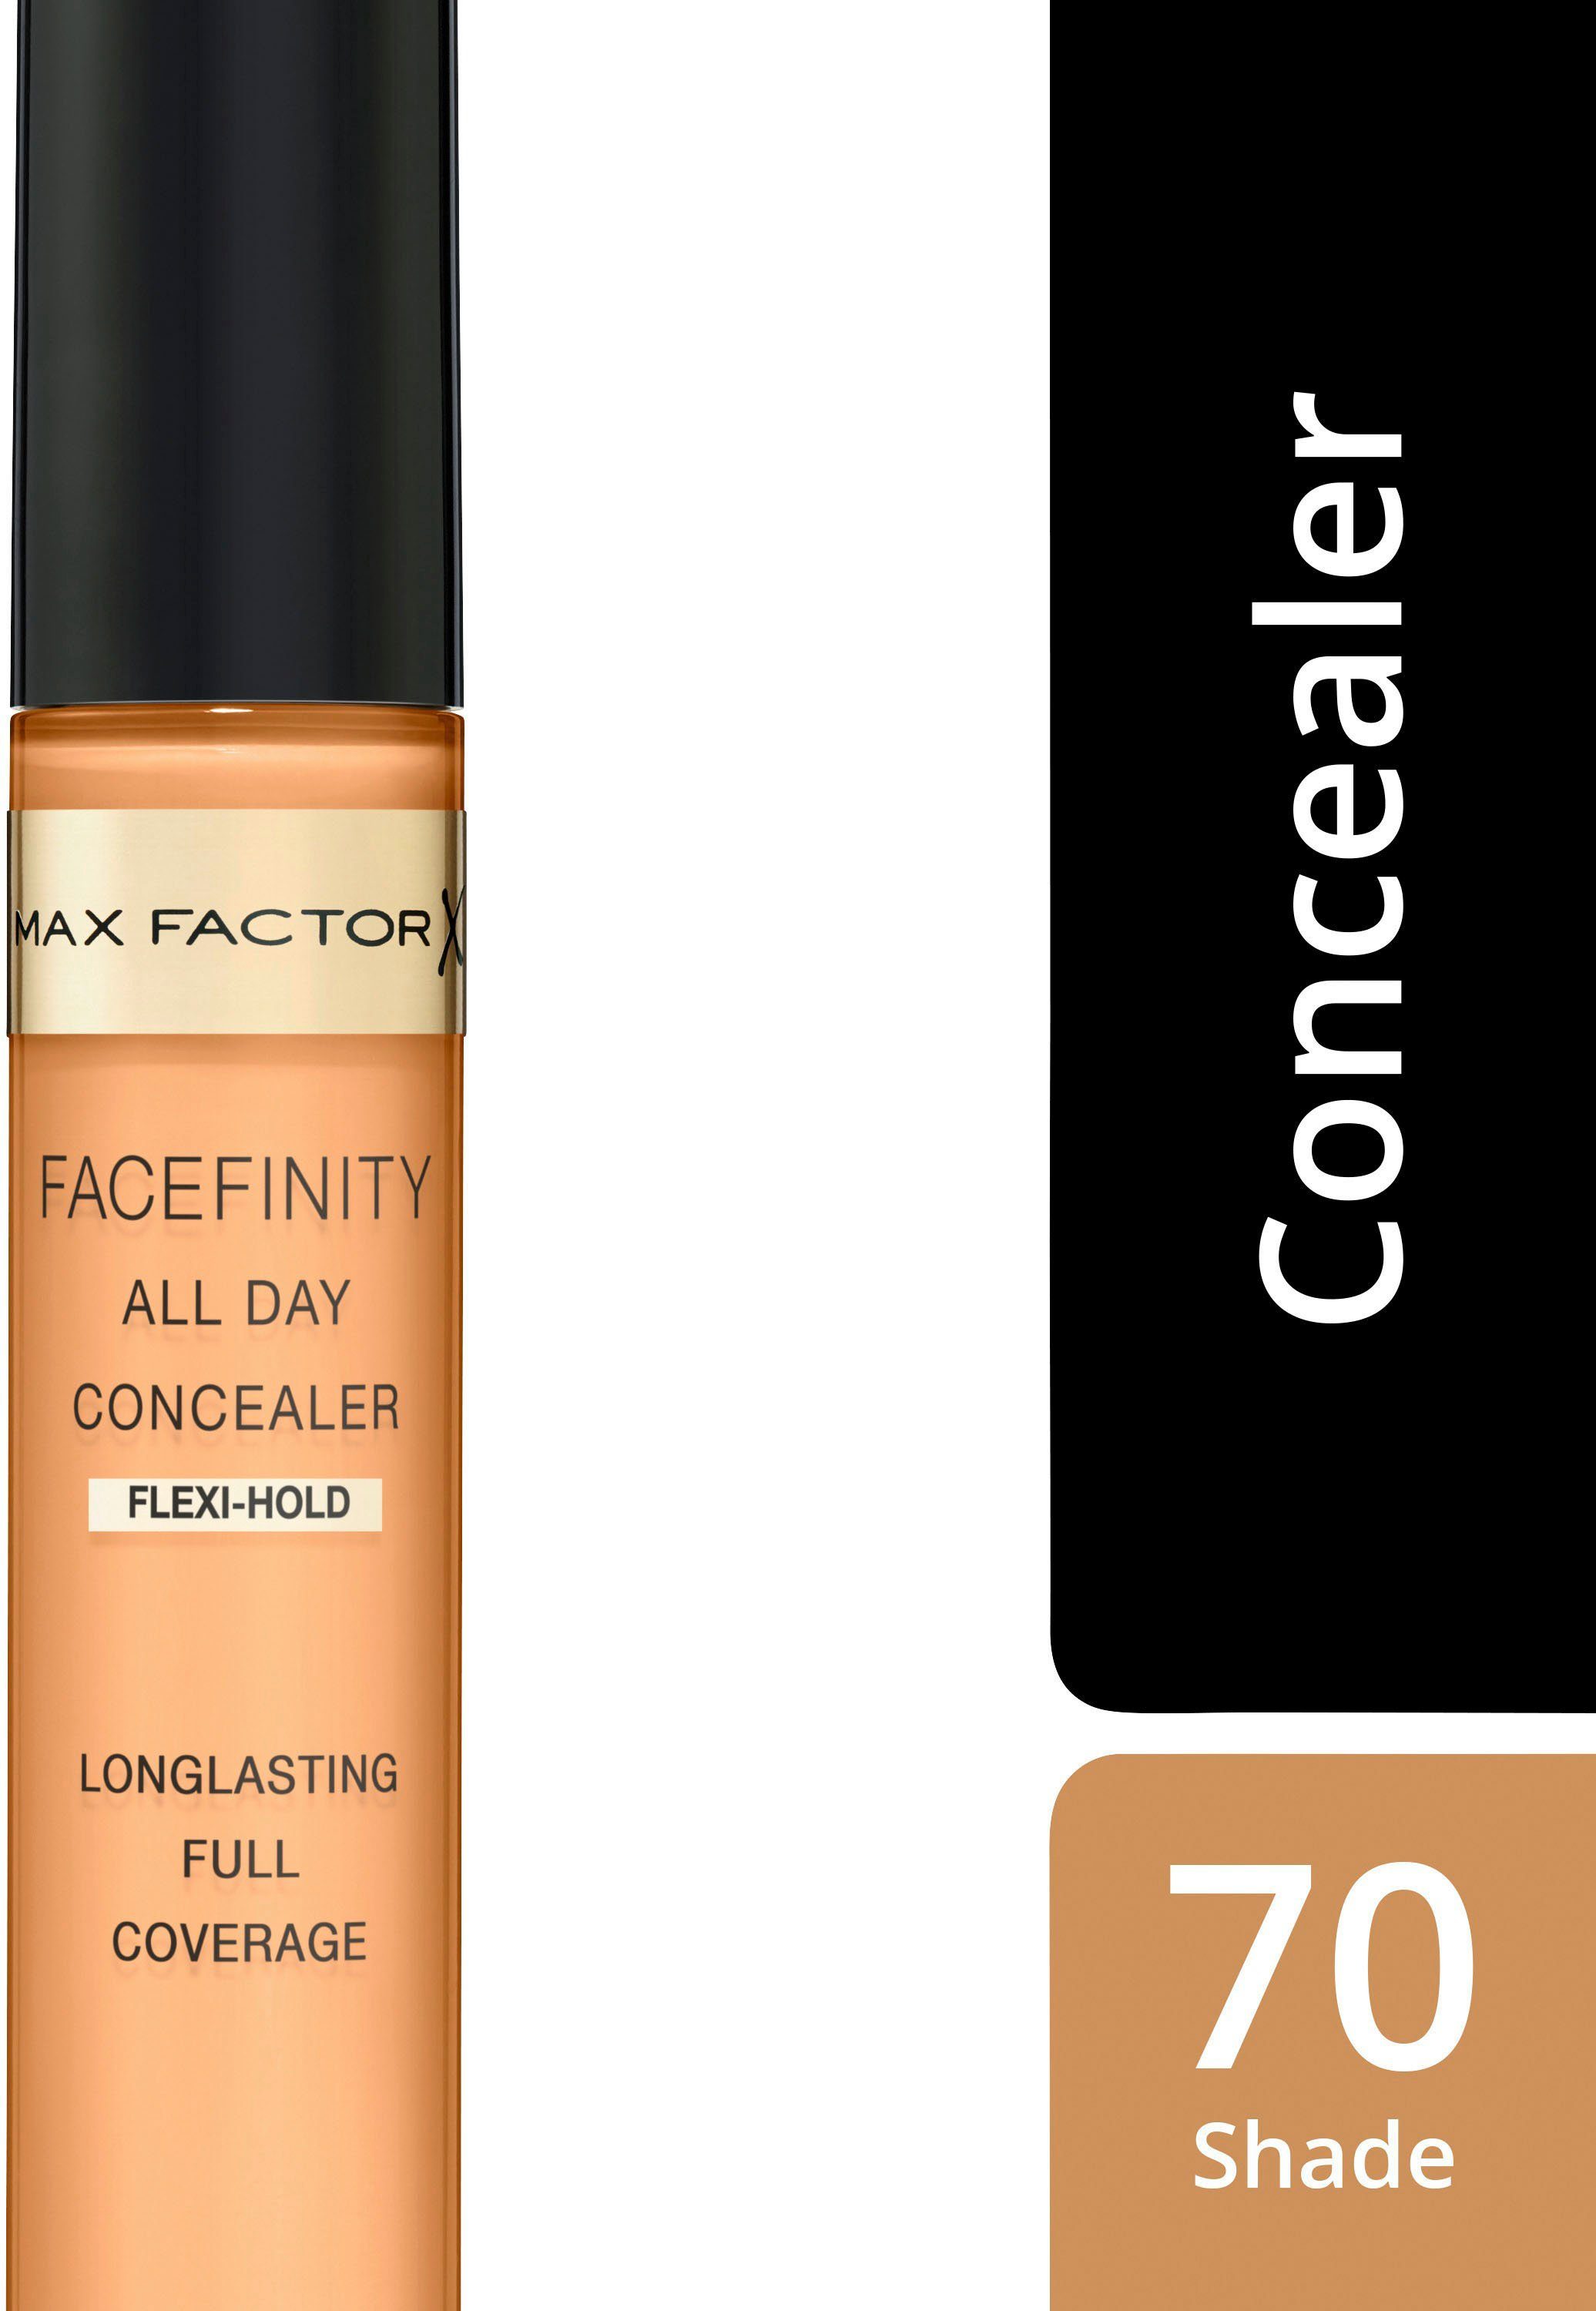 MAX FACTOR 70 Day All FACEFINITY Concealer Flawless